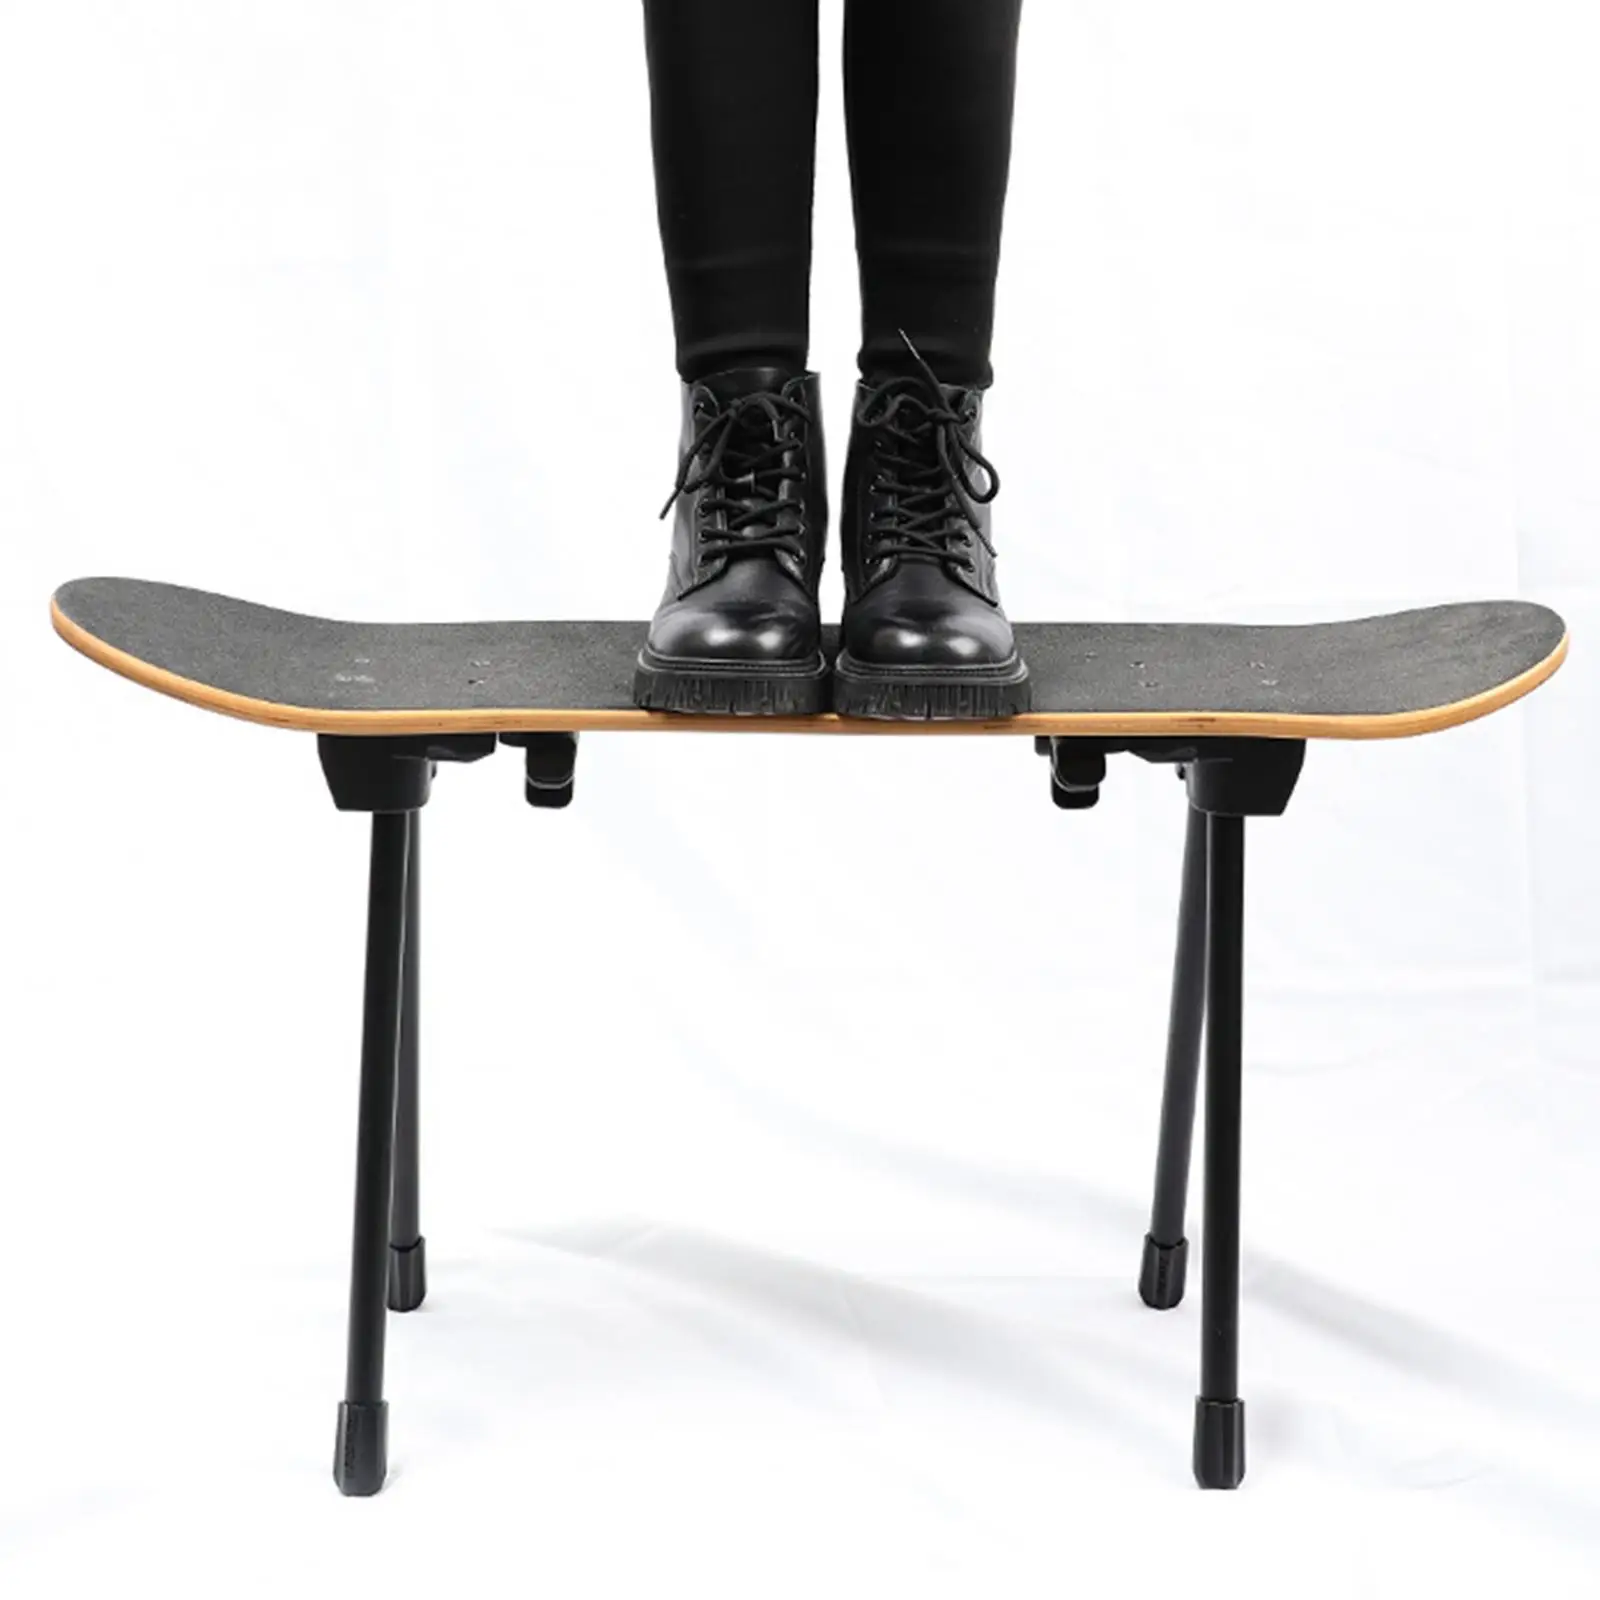 Foldable Camping Table Skateboard Foot DIY Furniture Legs Sturdy Portable with Screws Board Fixture Skateboard Camping Equipment